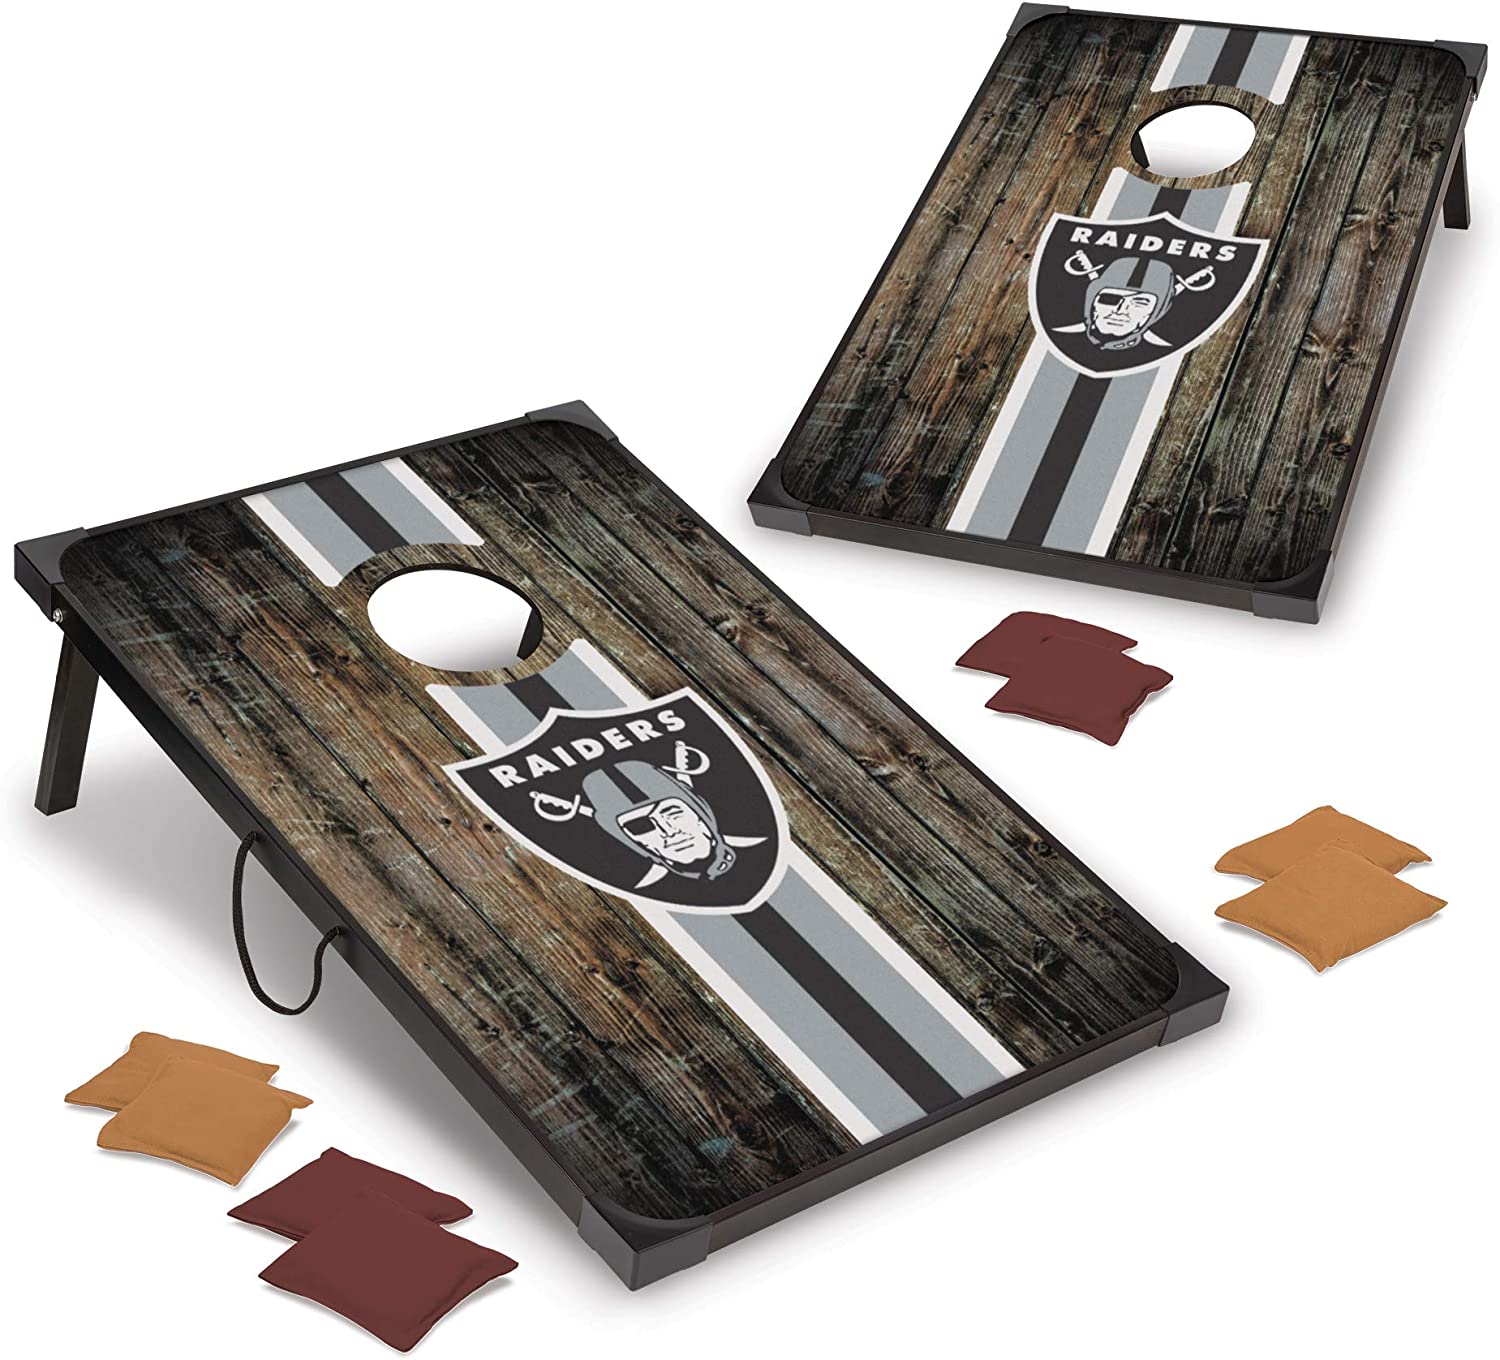 Photo 1 of NFL Pro Football 2 x 3 MDF Wood Deluxe Cornhole Set by Wild Sports Comes with 8 Bean Bags  Perfect for Tailgate Outdoor Backyard